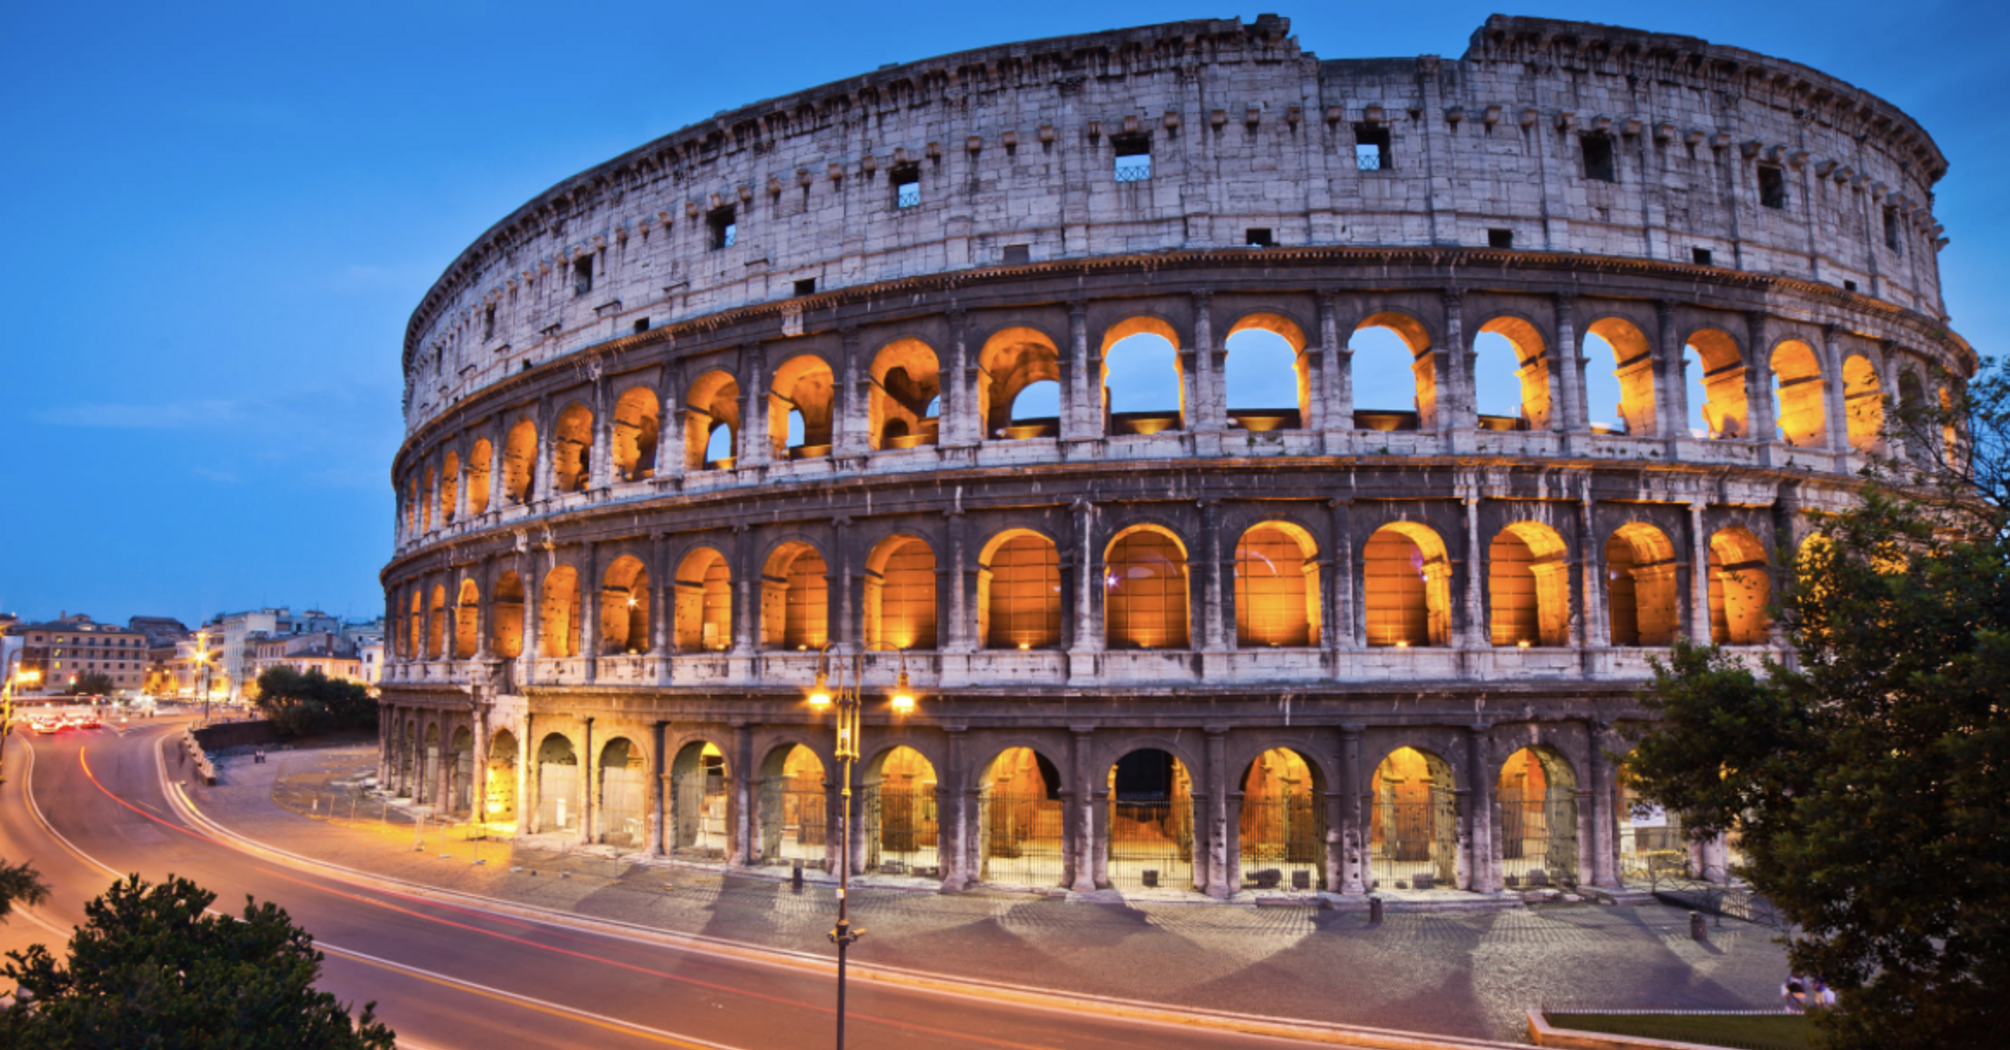 Rome is called the "eternal city" because of its ancient architecture.